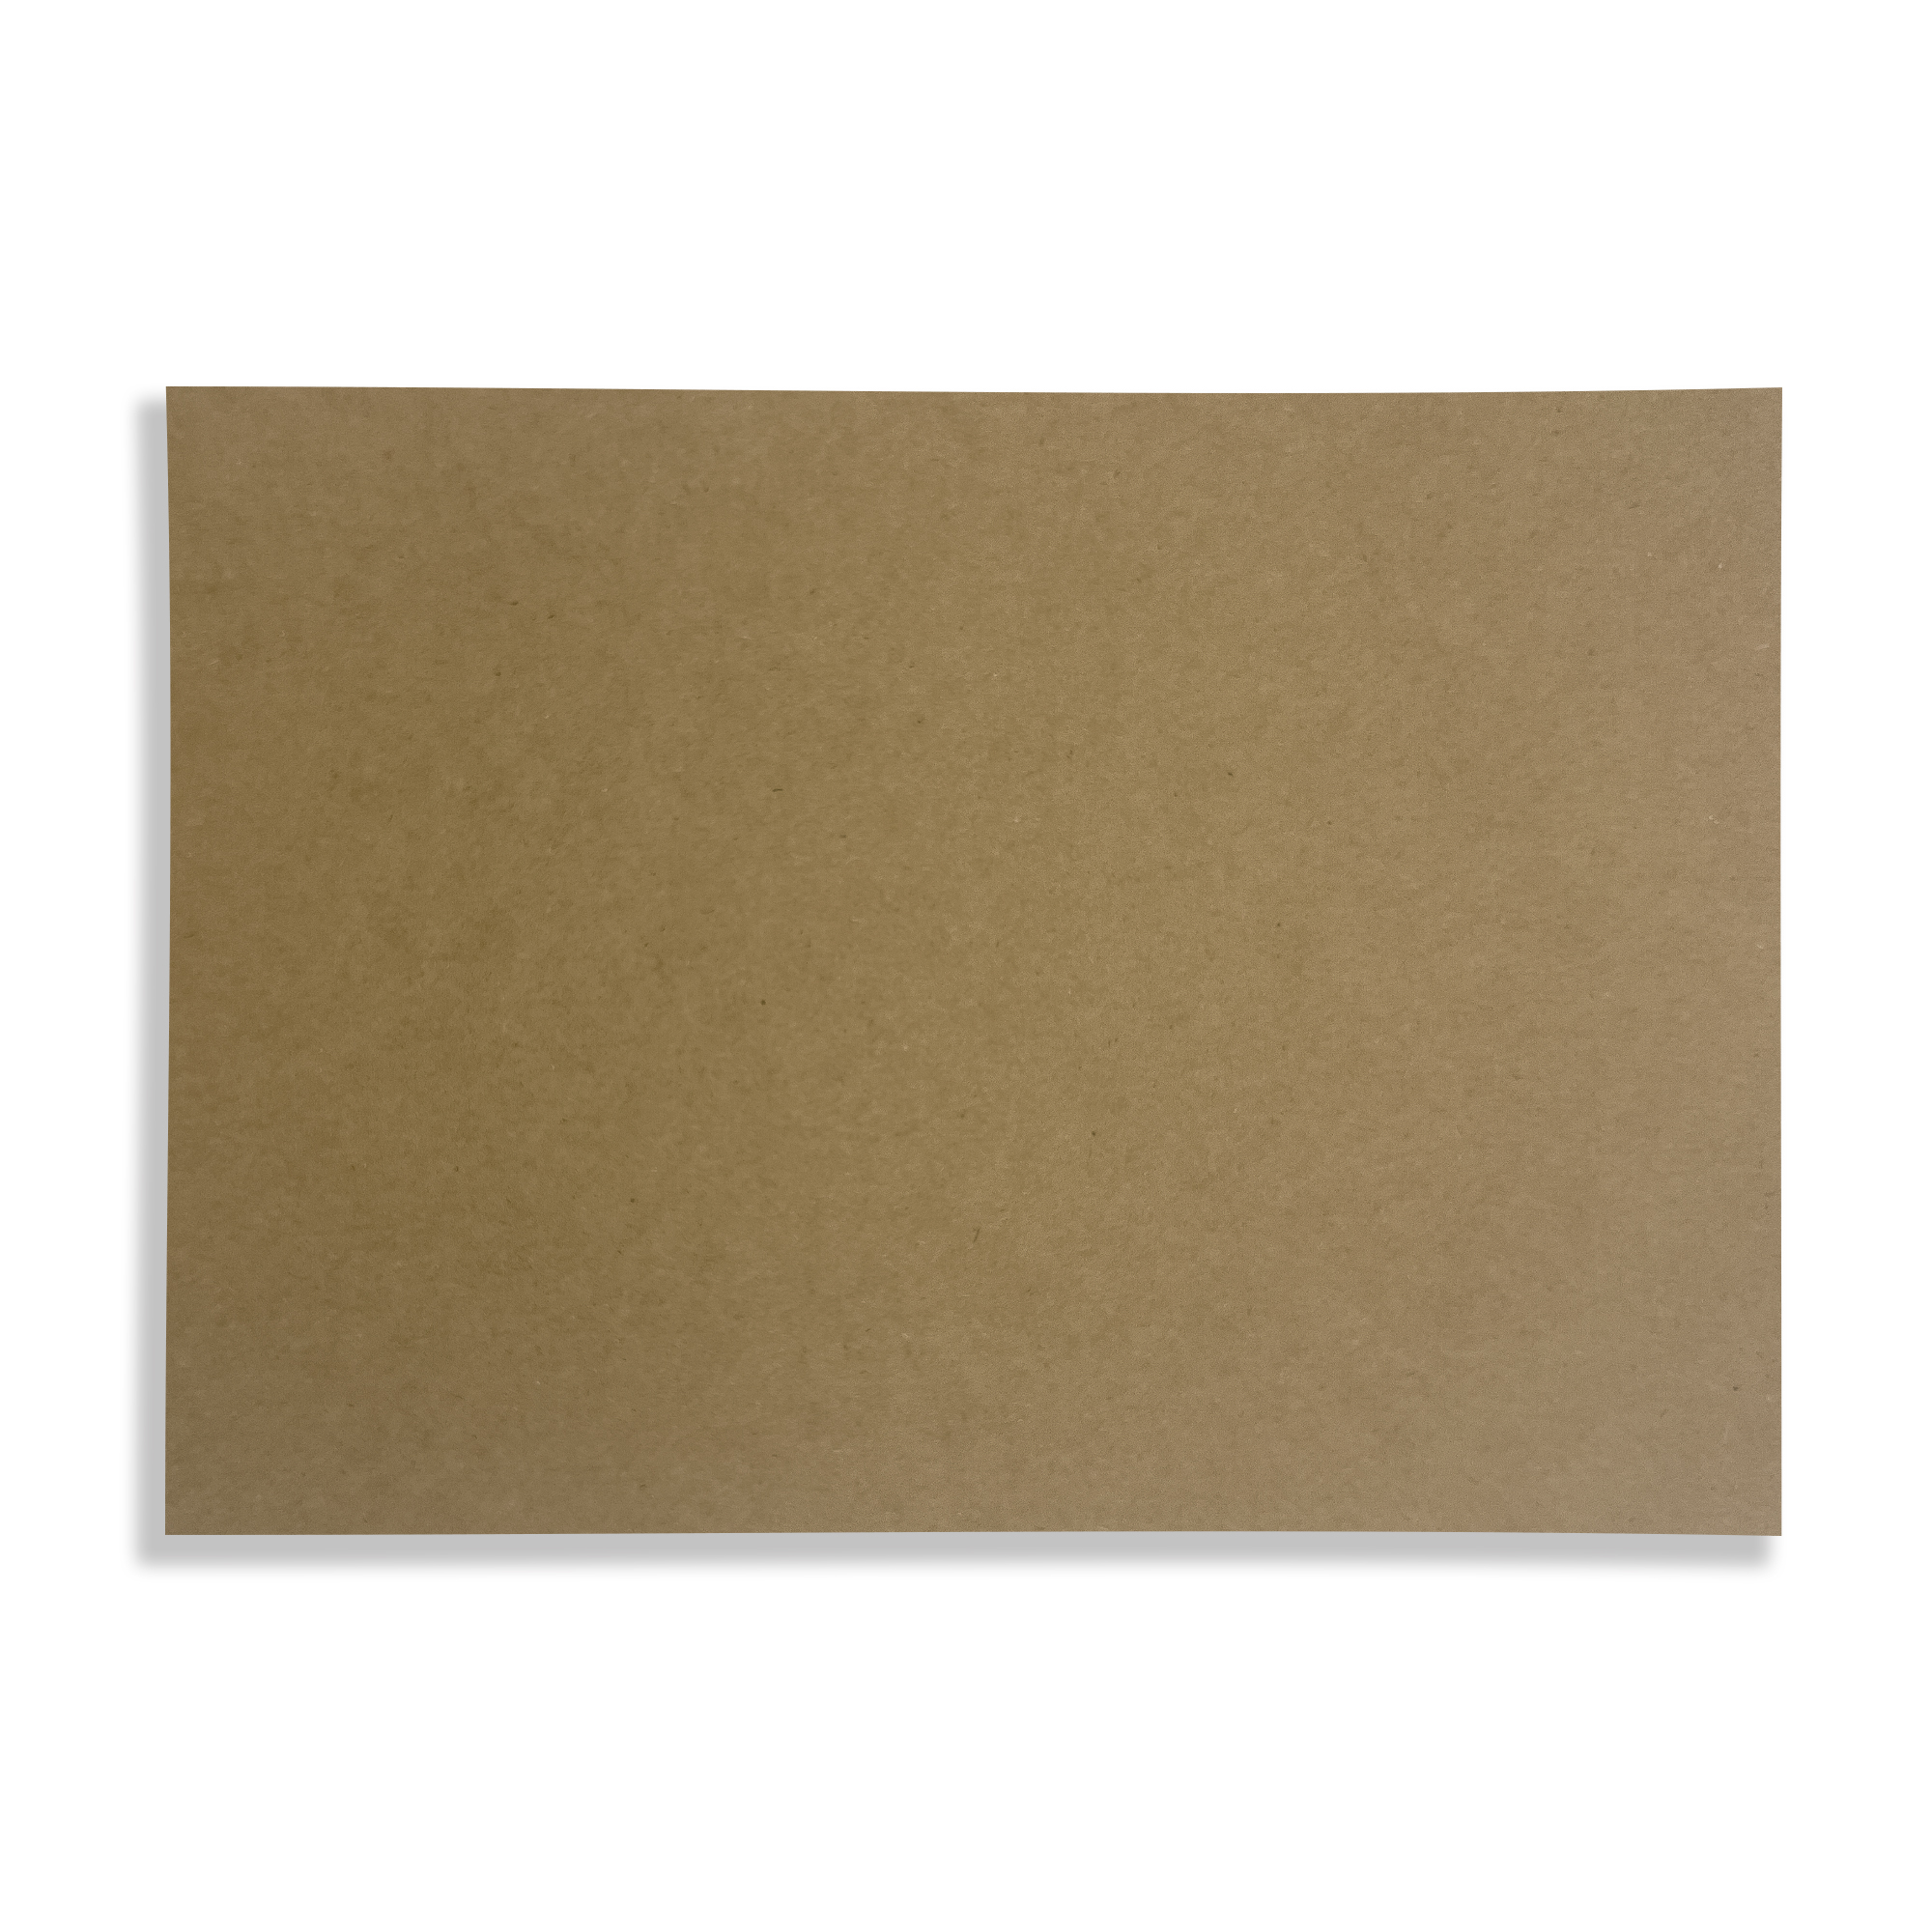 A5 Cairn Eco Kraft Recycled 280gsm Card - The Envelope People